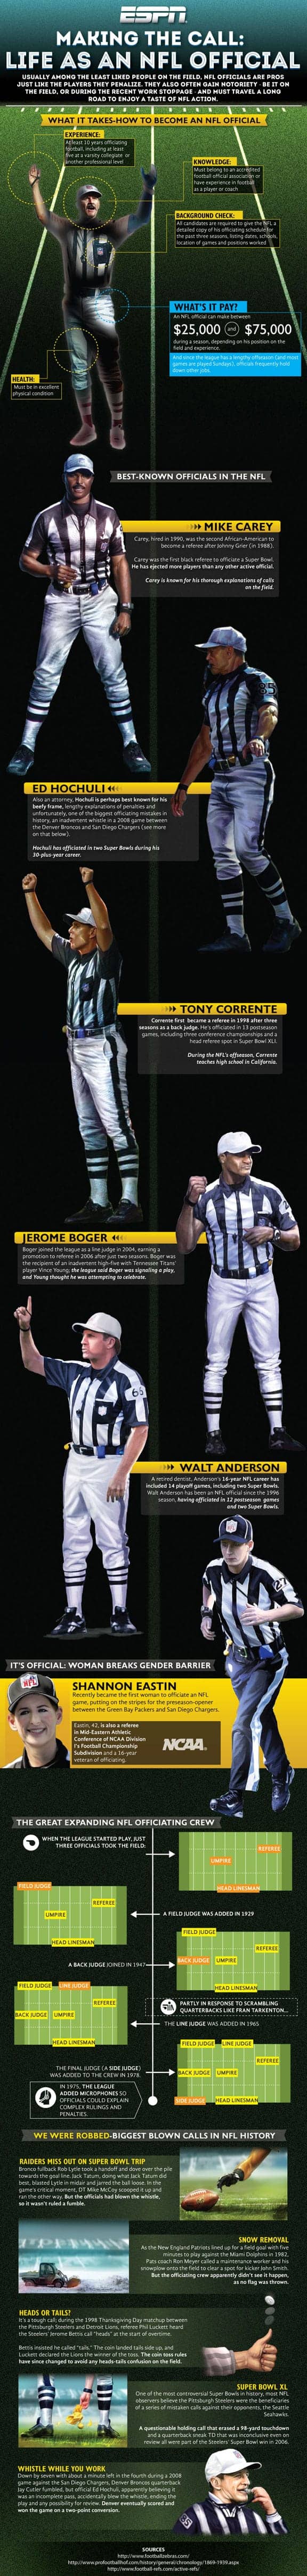 Life and times of an NFL official